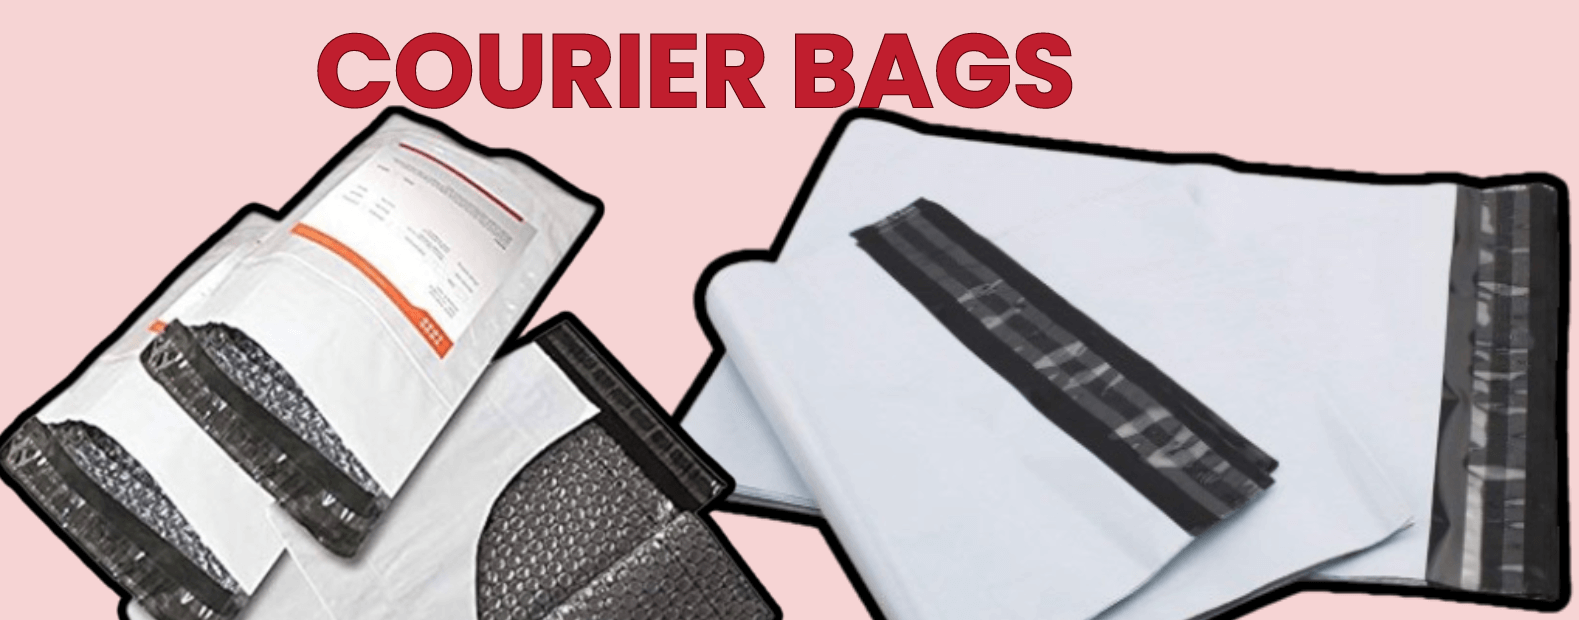 courier bags with sealing tape glue and pod available white and black